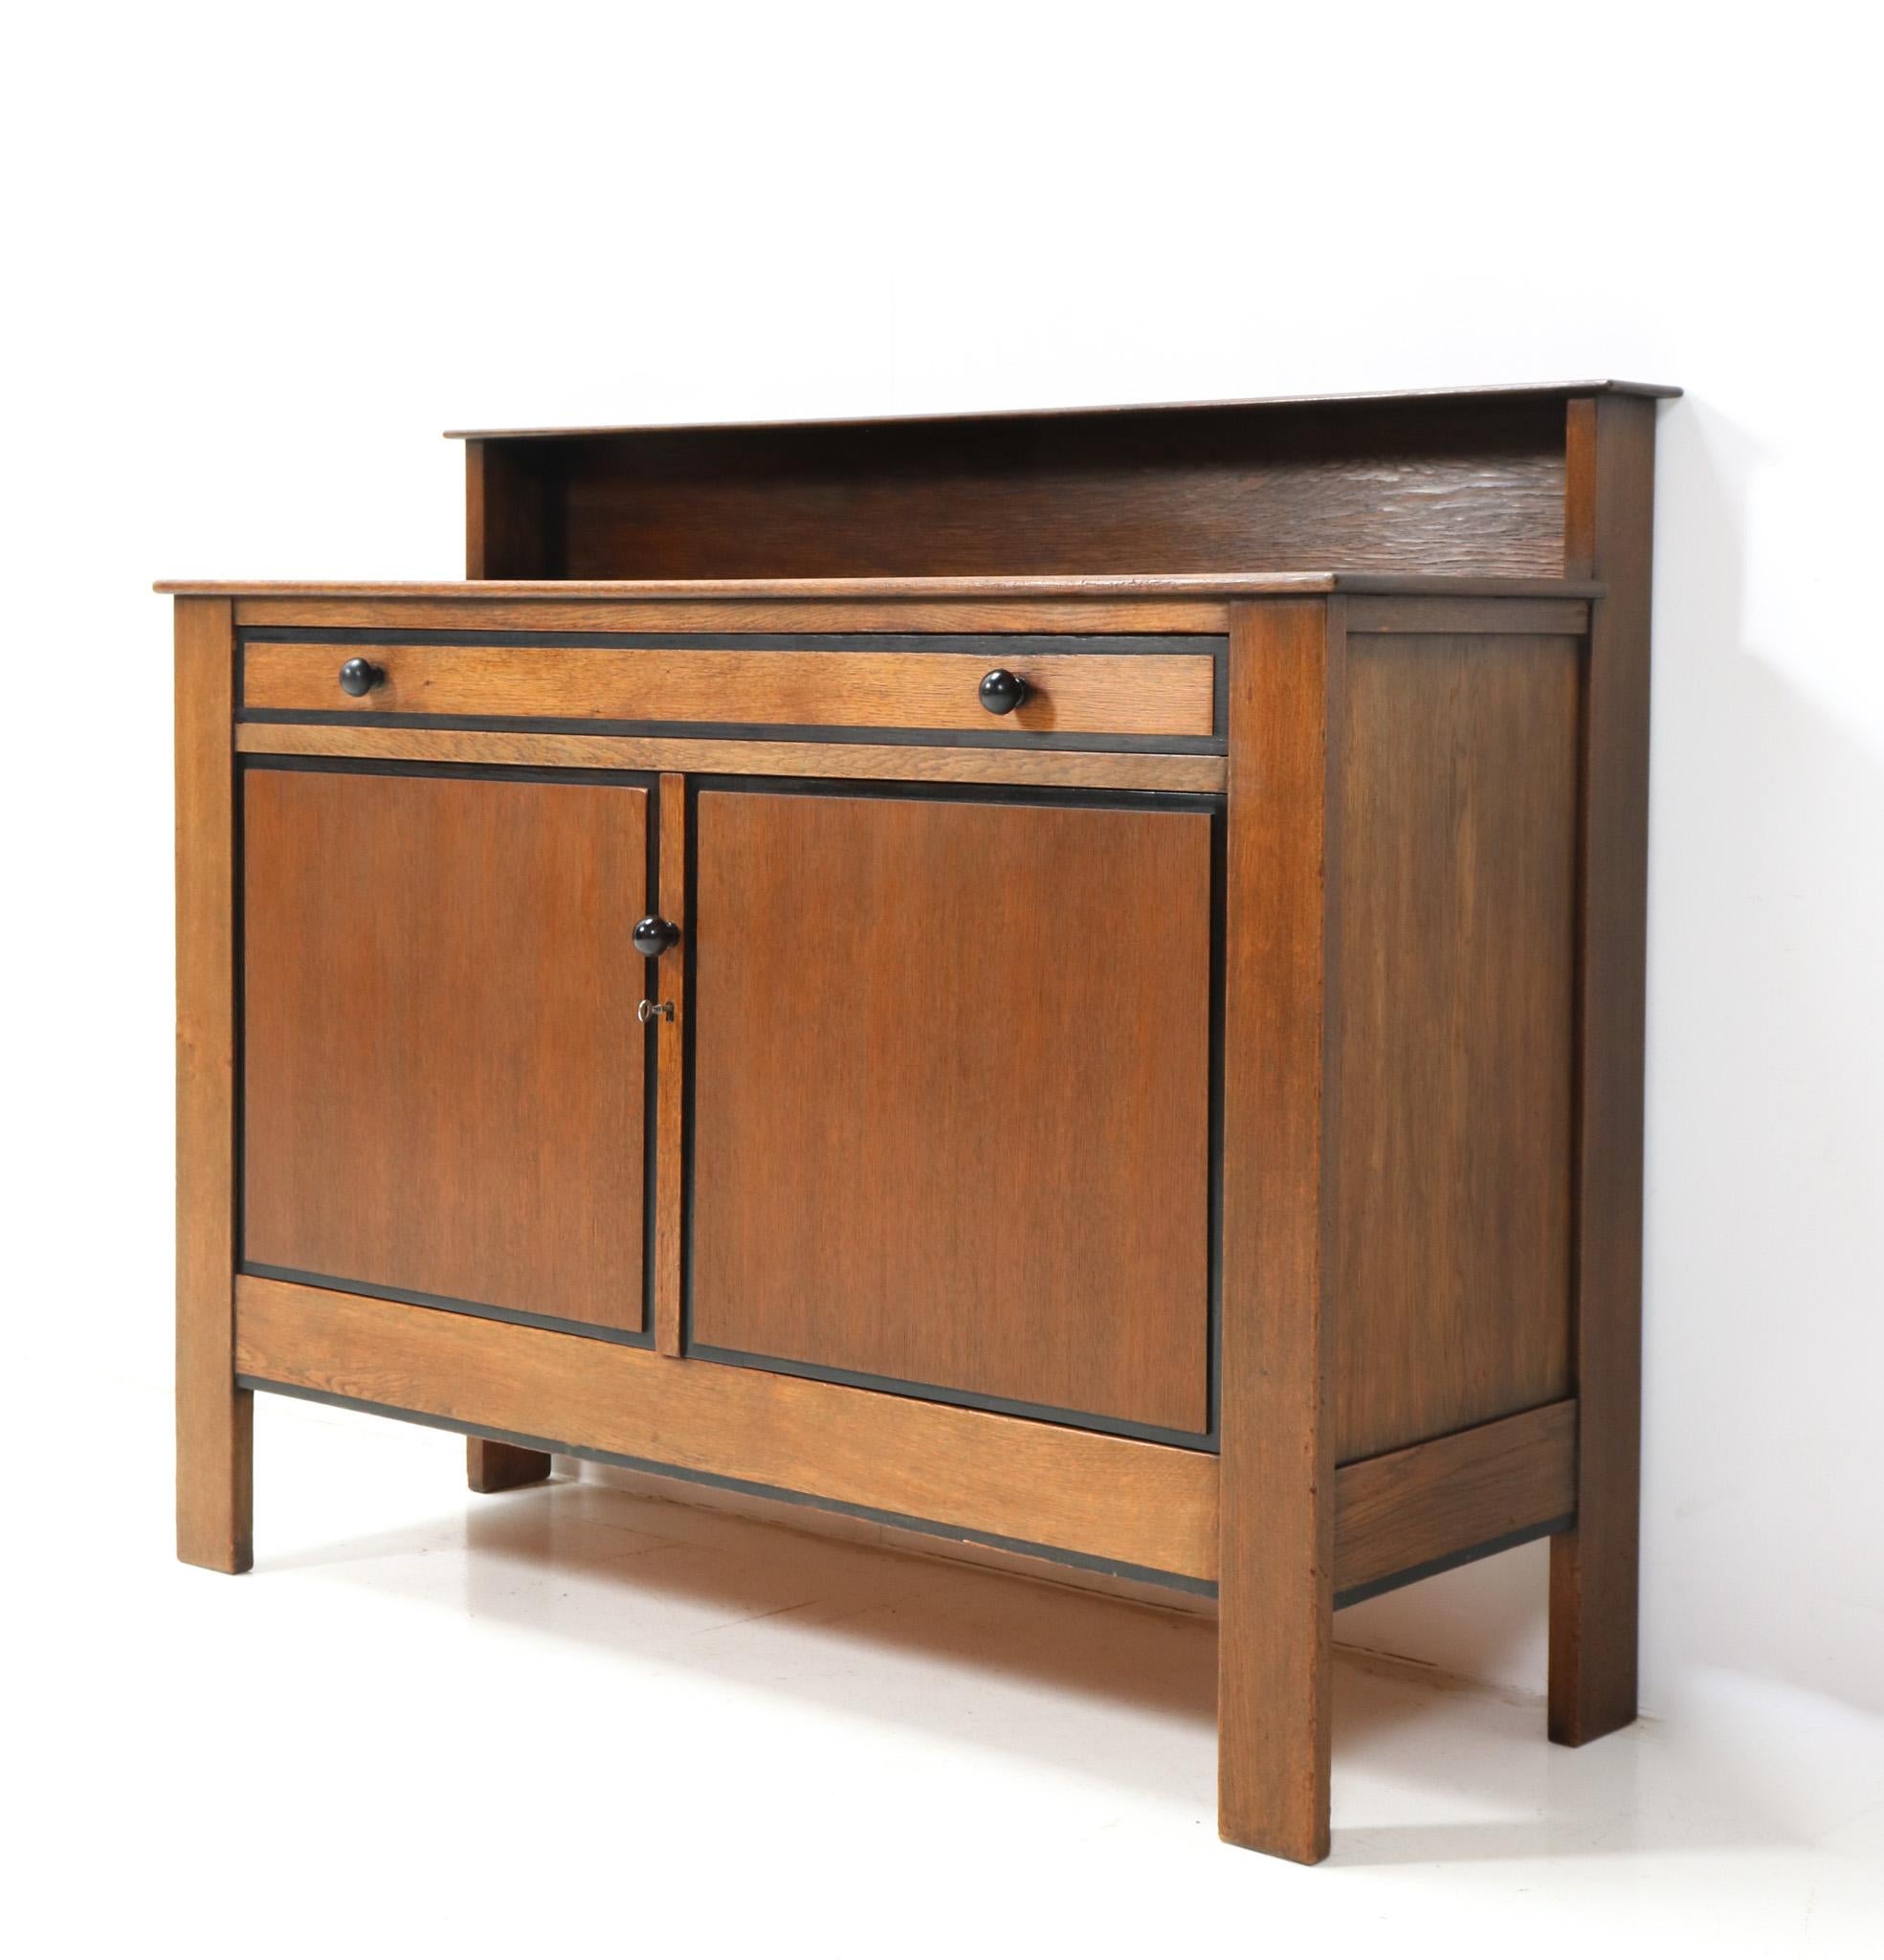 Oak Art Deco Modernist Credenza by J.A. Muntendam for L.O.V. Oosterbeek, 1920s In Good Condition For Sale In Amsterdam, NL